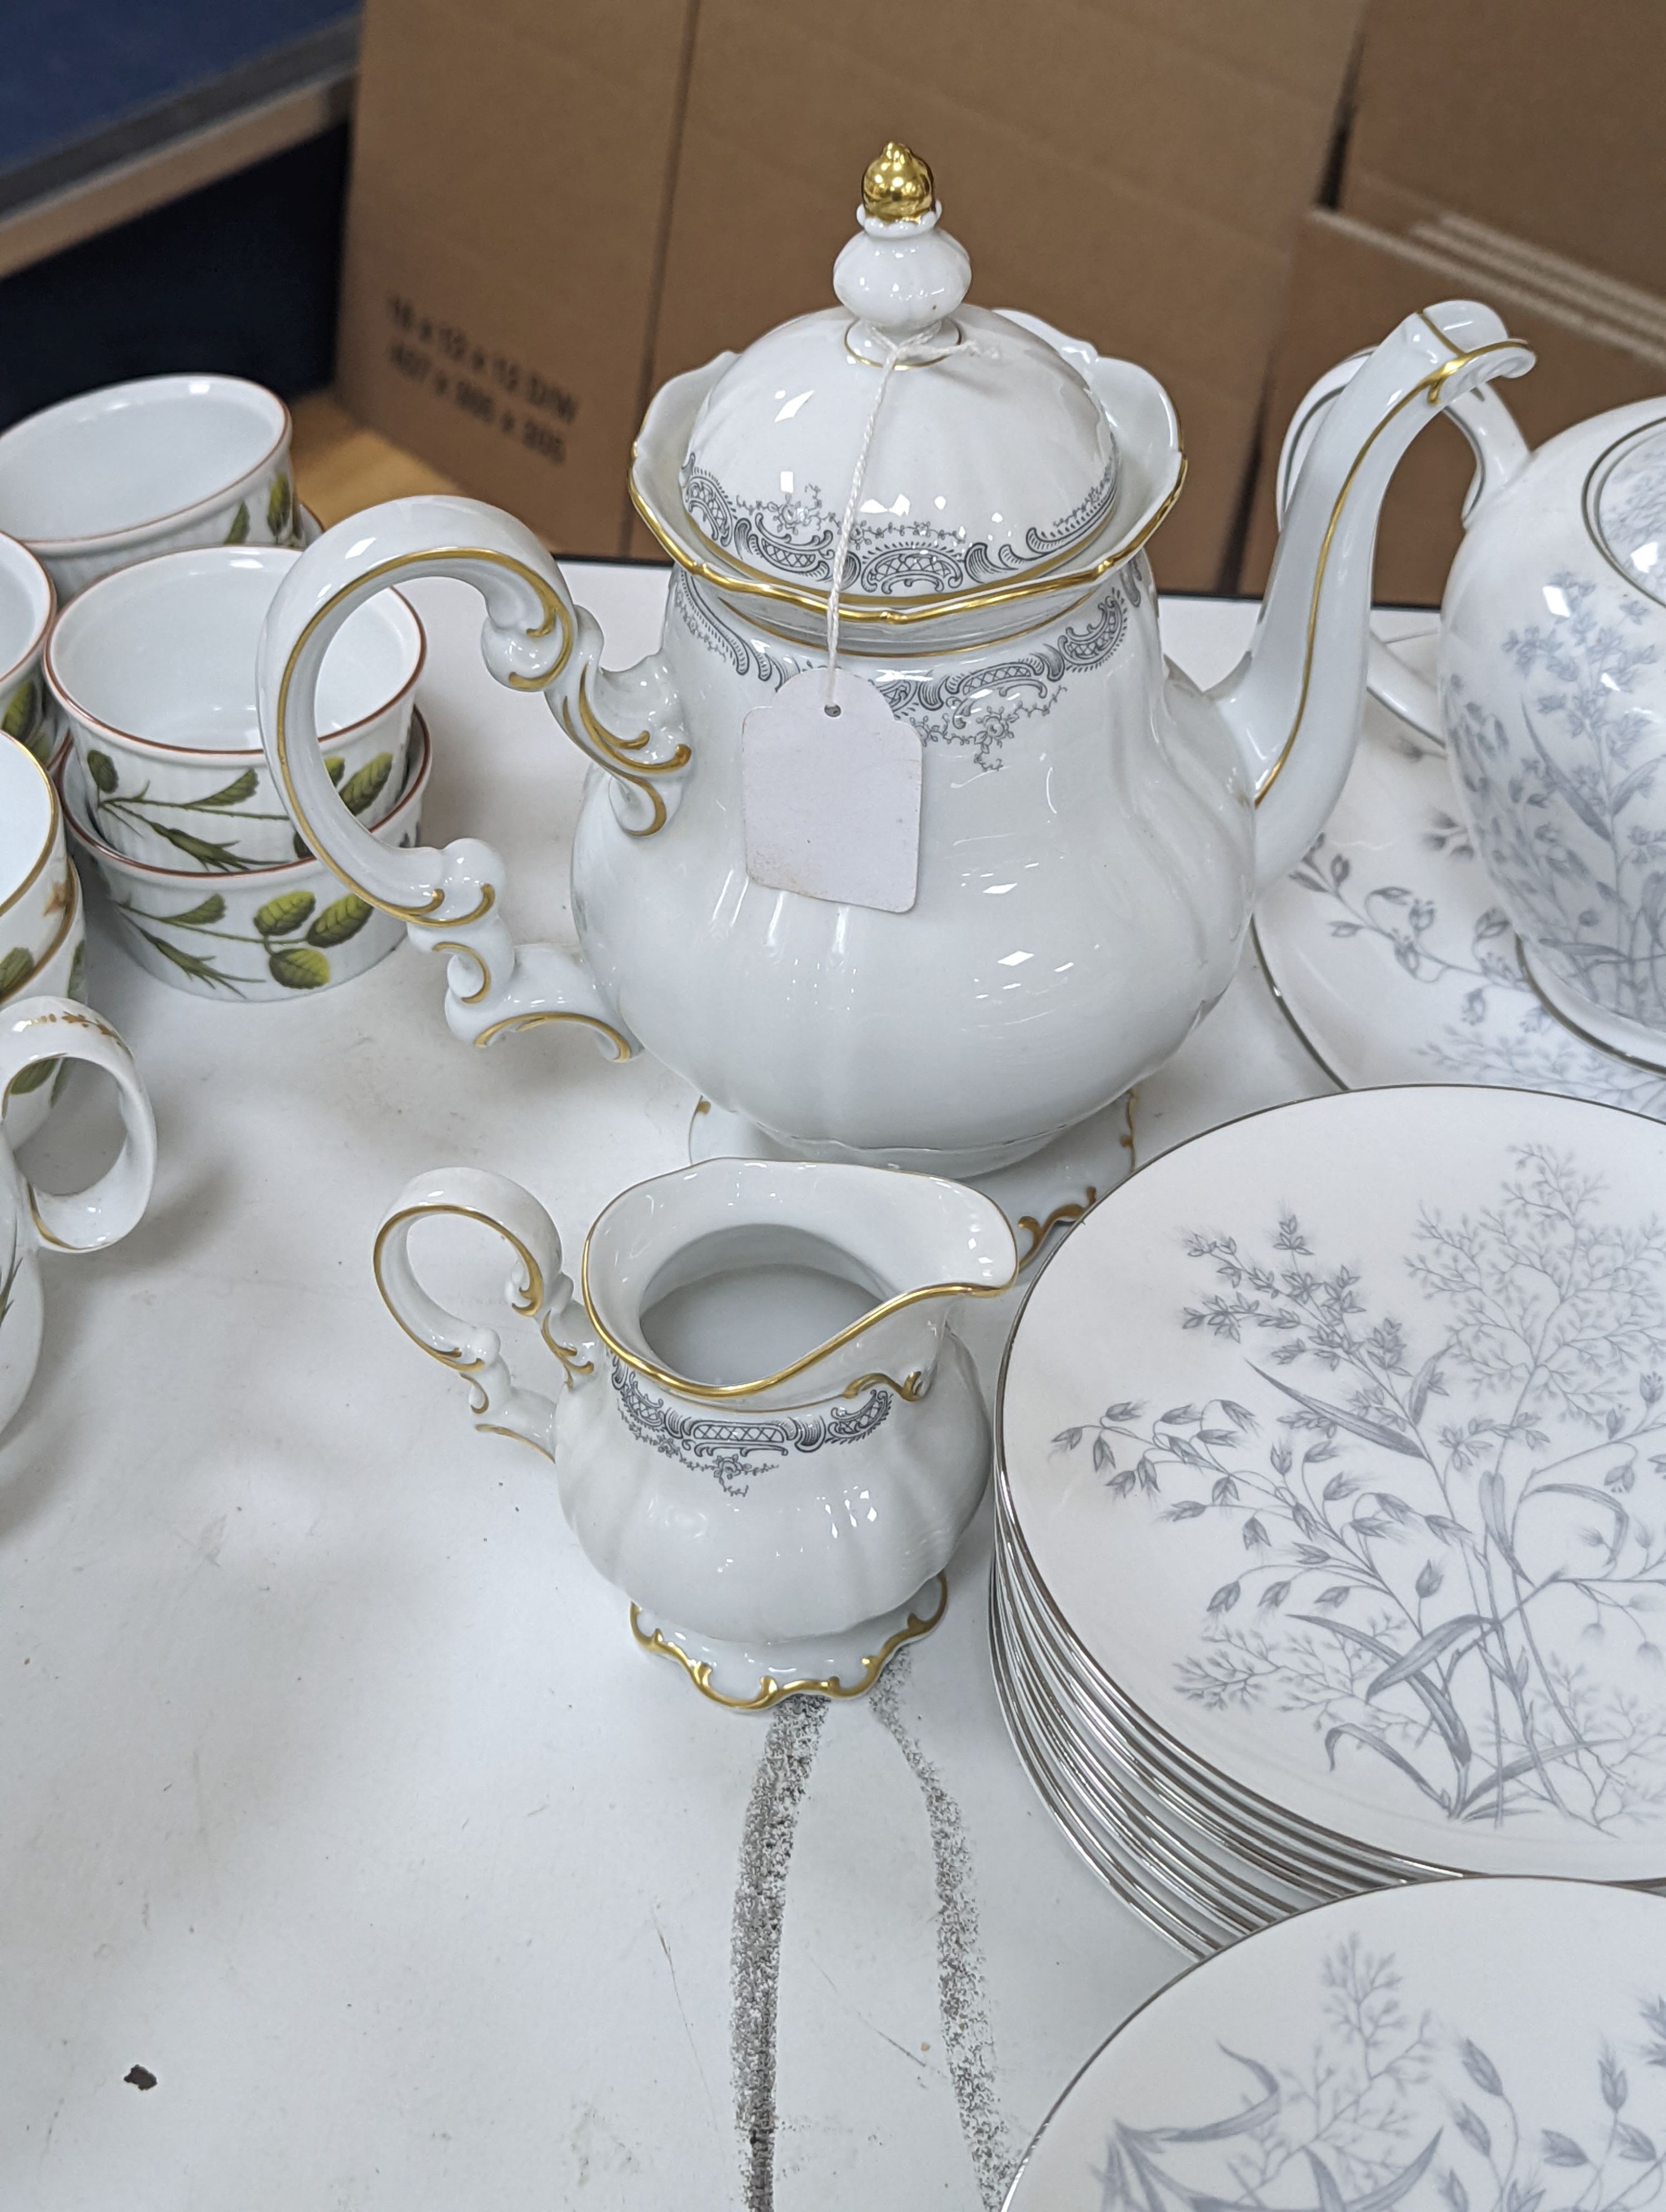 A Tuscan teaset and Hutschenreuther part service